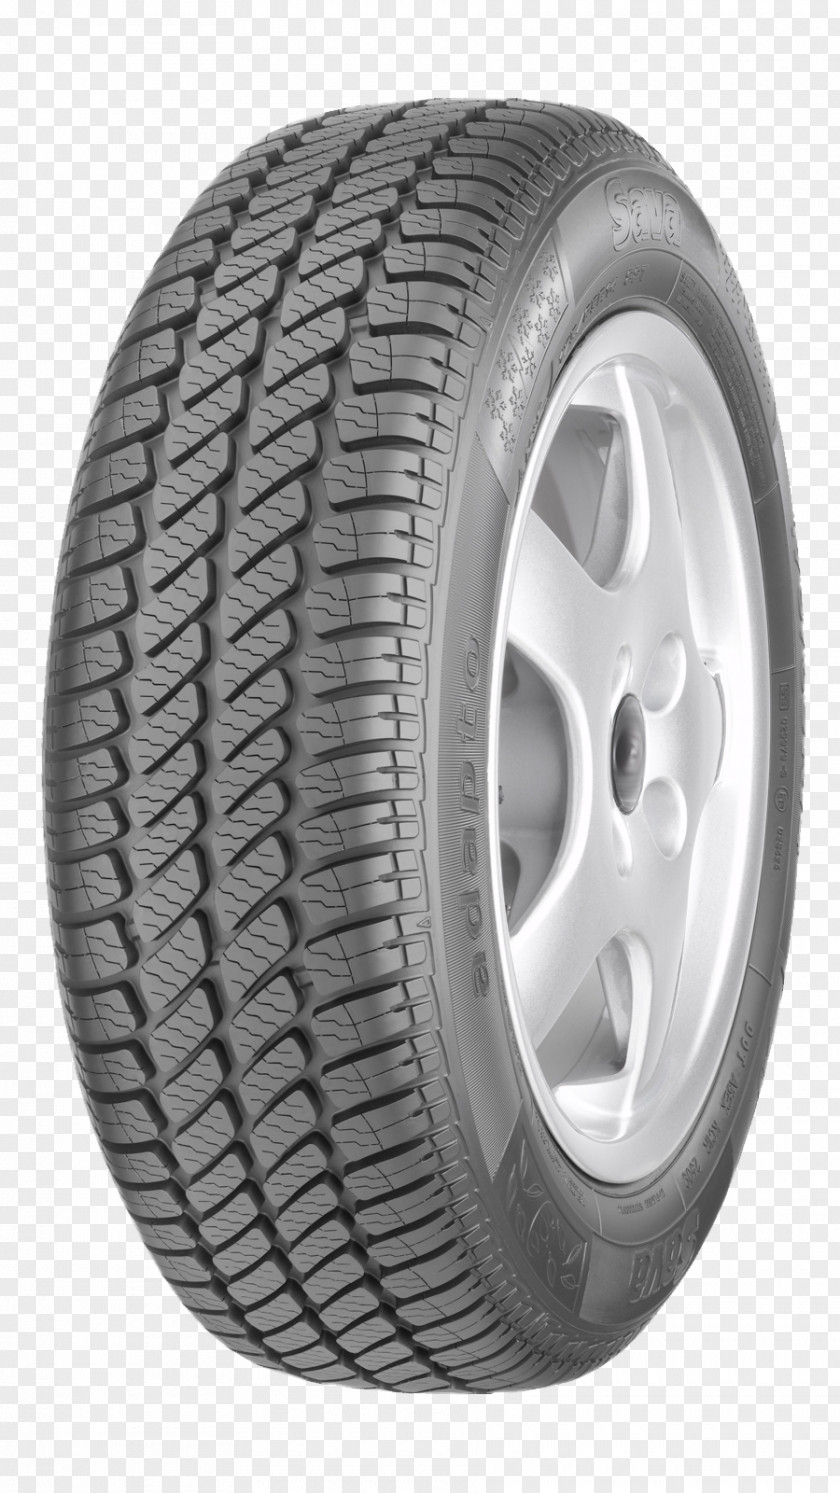 Car Goodyear Tire And Rubber Company Giti Dunlop Sava Tires PNG